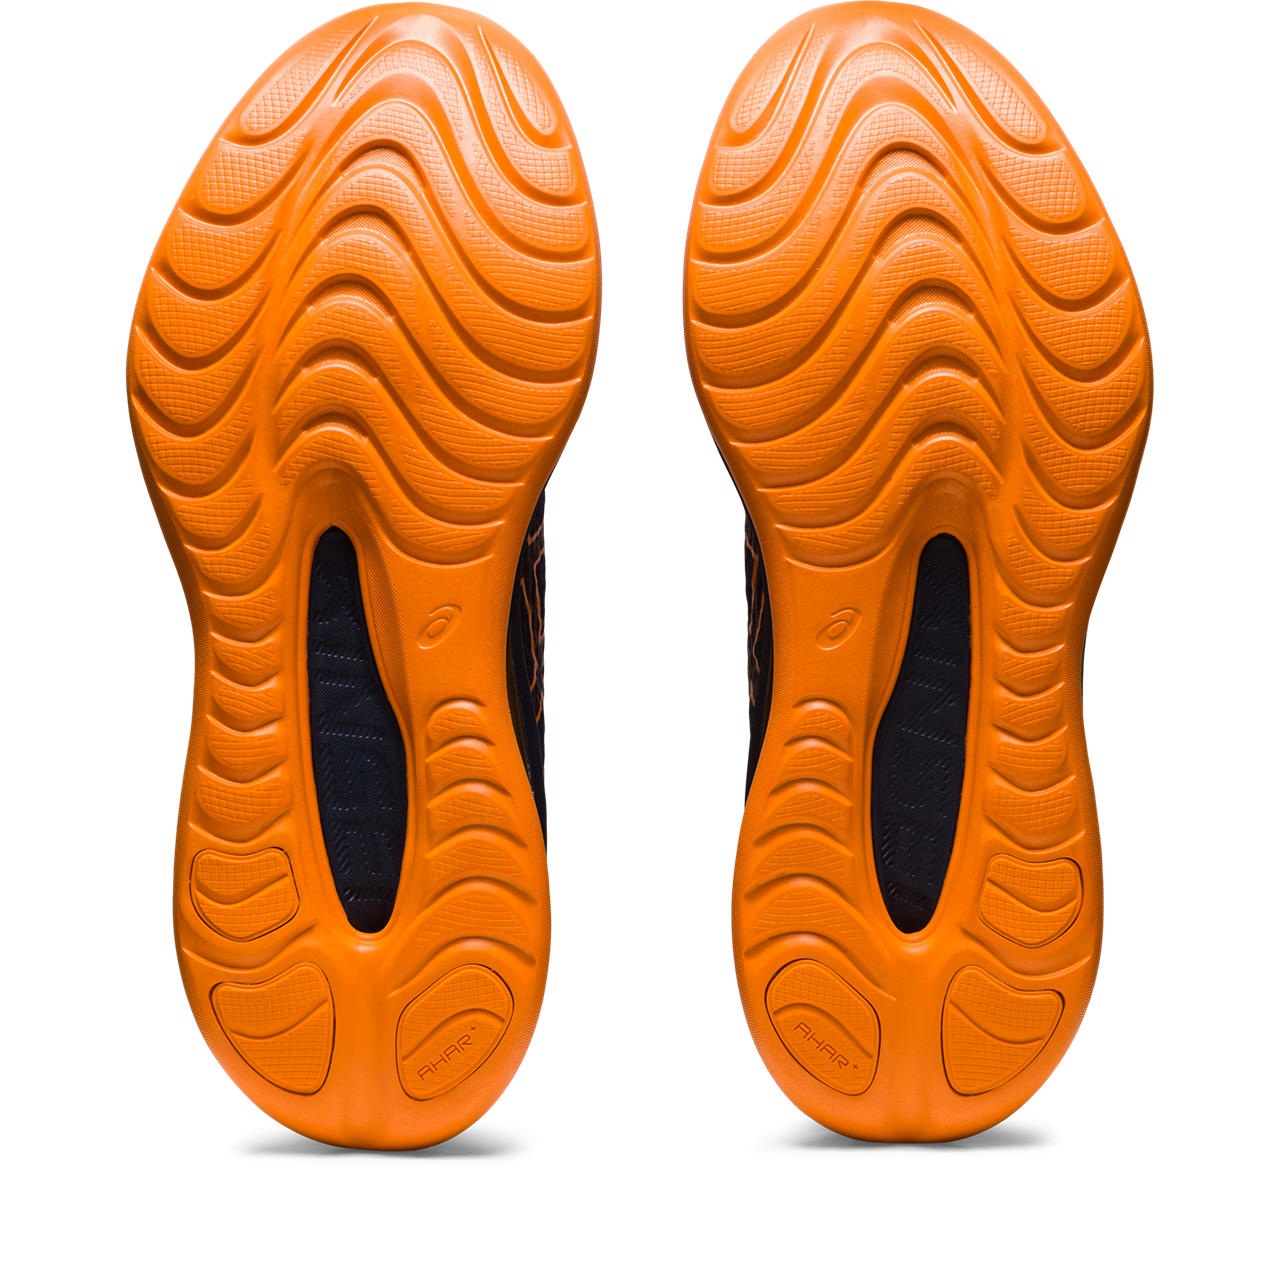 The upper of thiw Men's Kinsei max is only has a few orange highlights, but the outsole is all orange